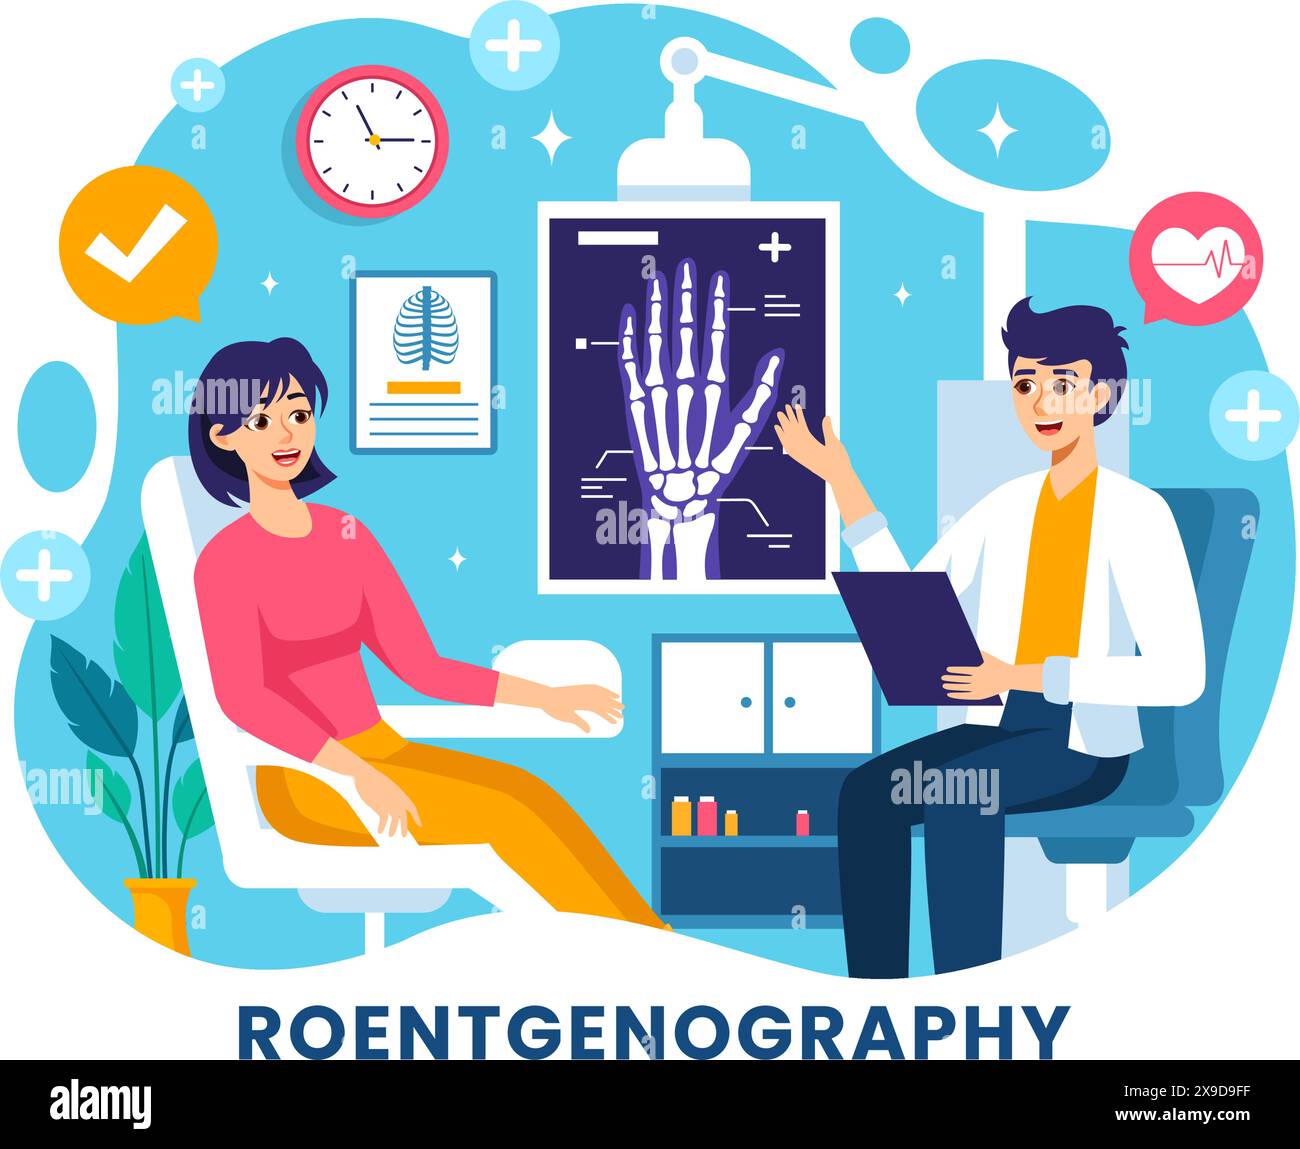 Roentgenography Vector Illustration with Fluorography Body Checkup Procedure, X-ray Scanning or Roentgen in Health Care in a Flat Cartoon Background Stock Vector